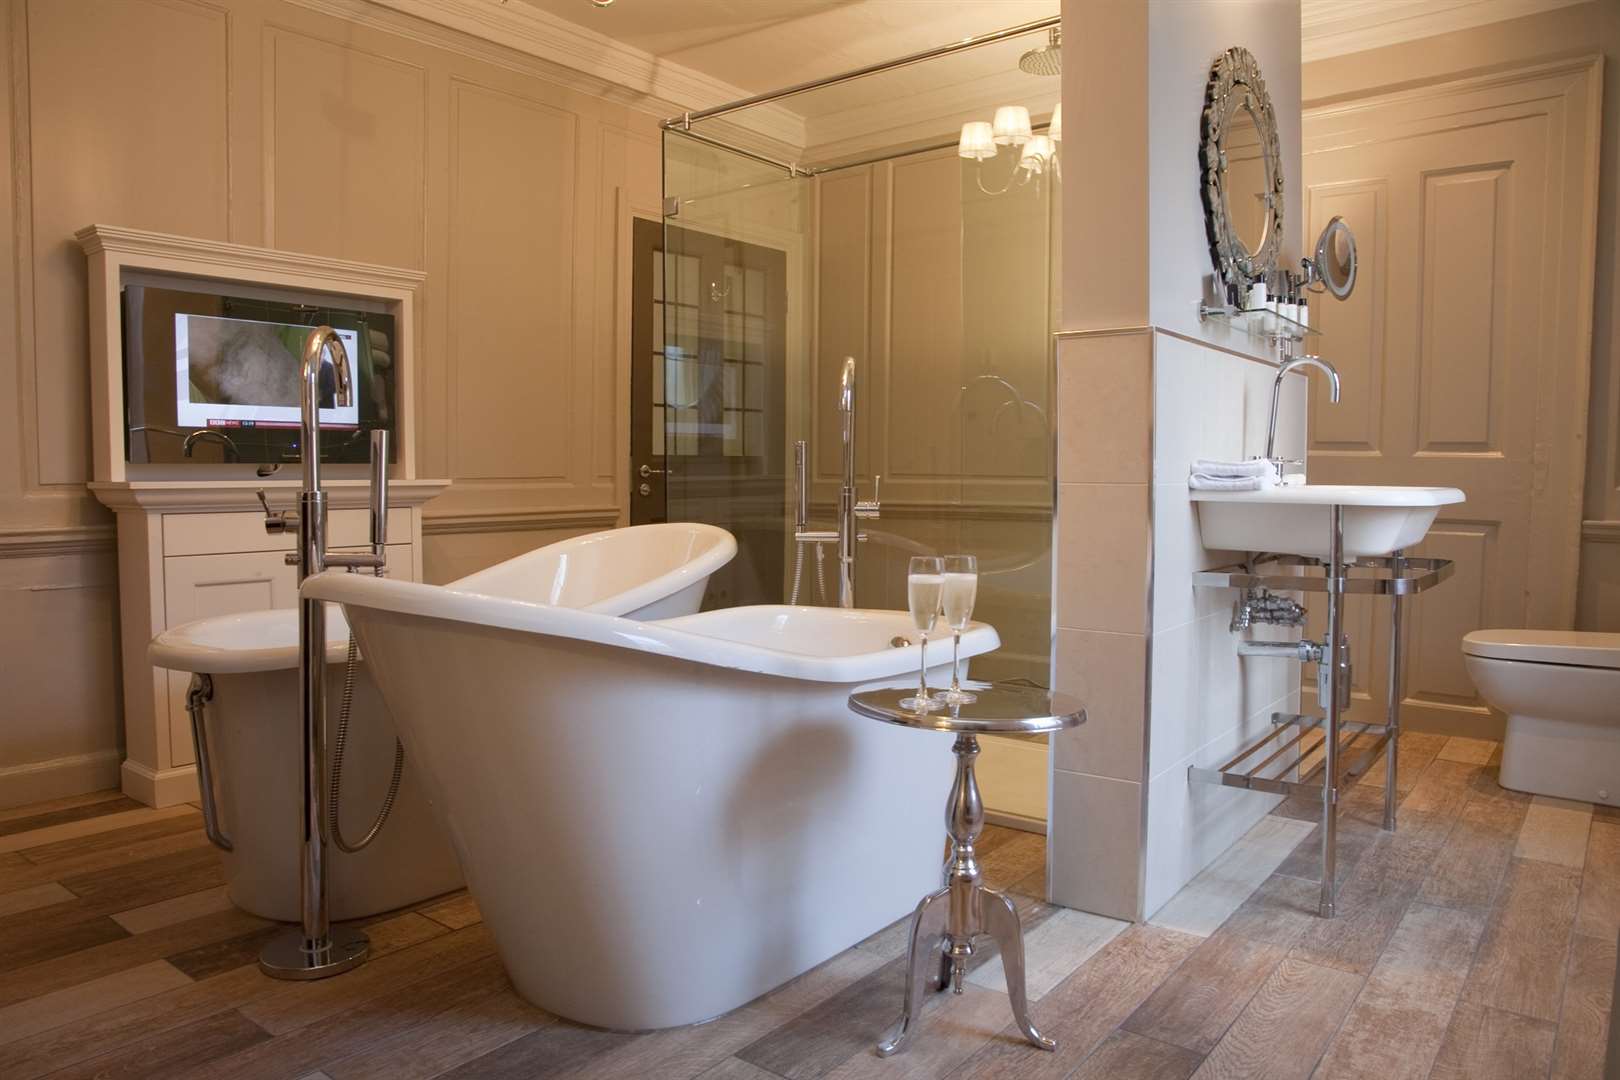 The bathroom of the Vicarage suite at Vanbrugh House luxury hotel in Oxford